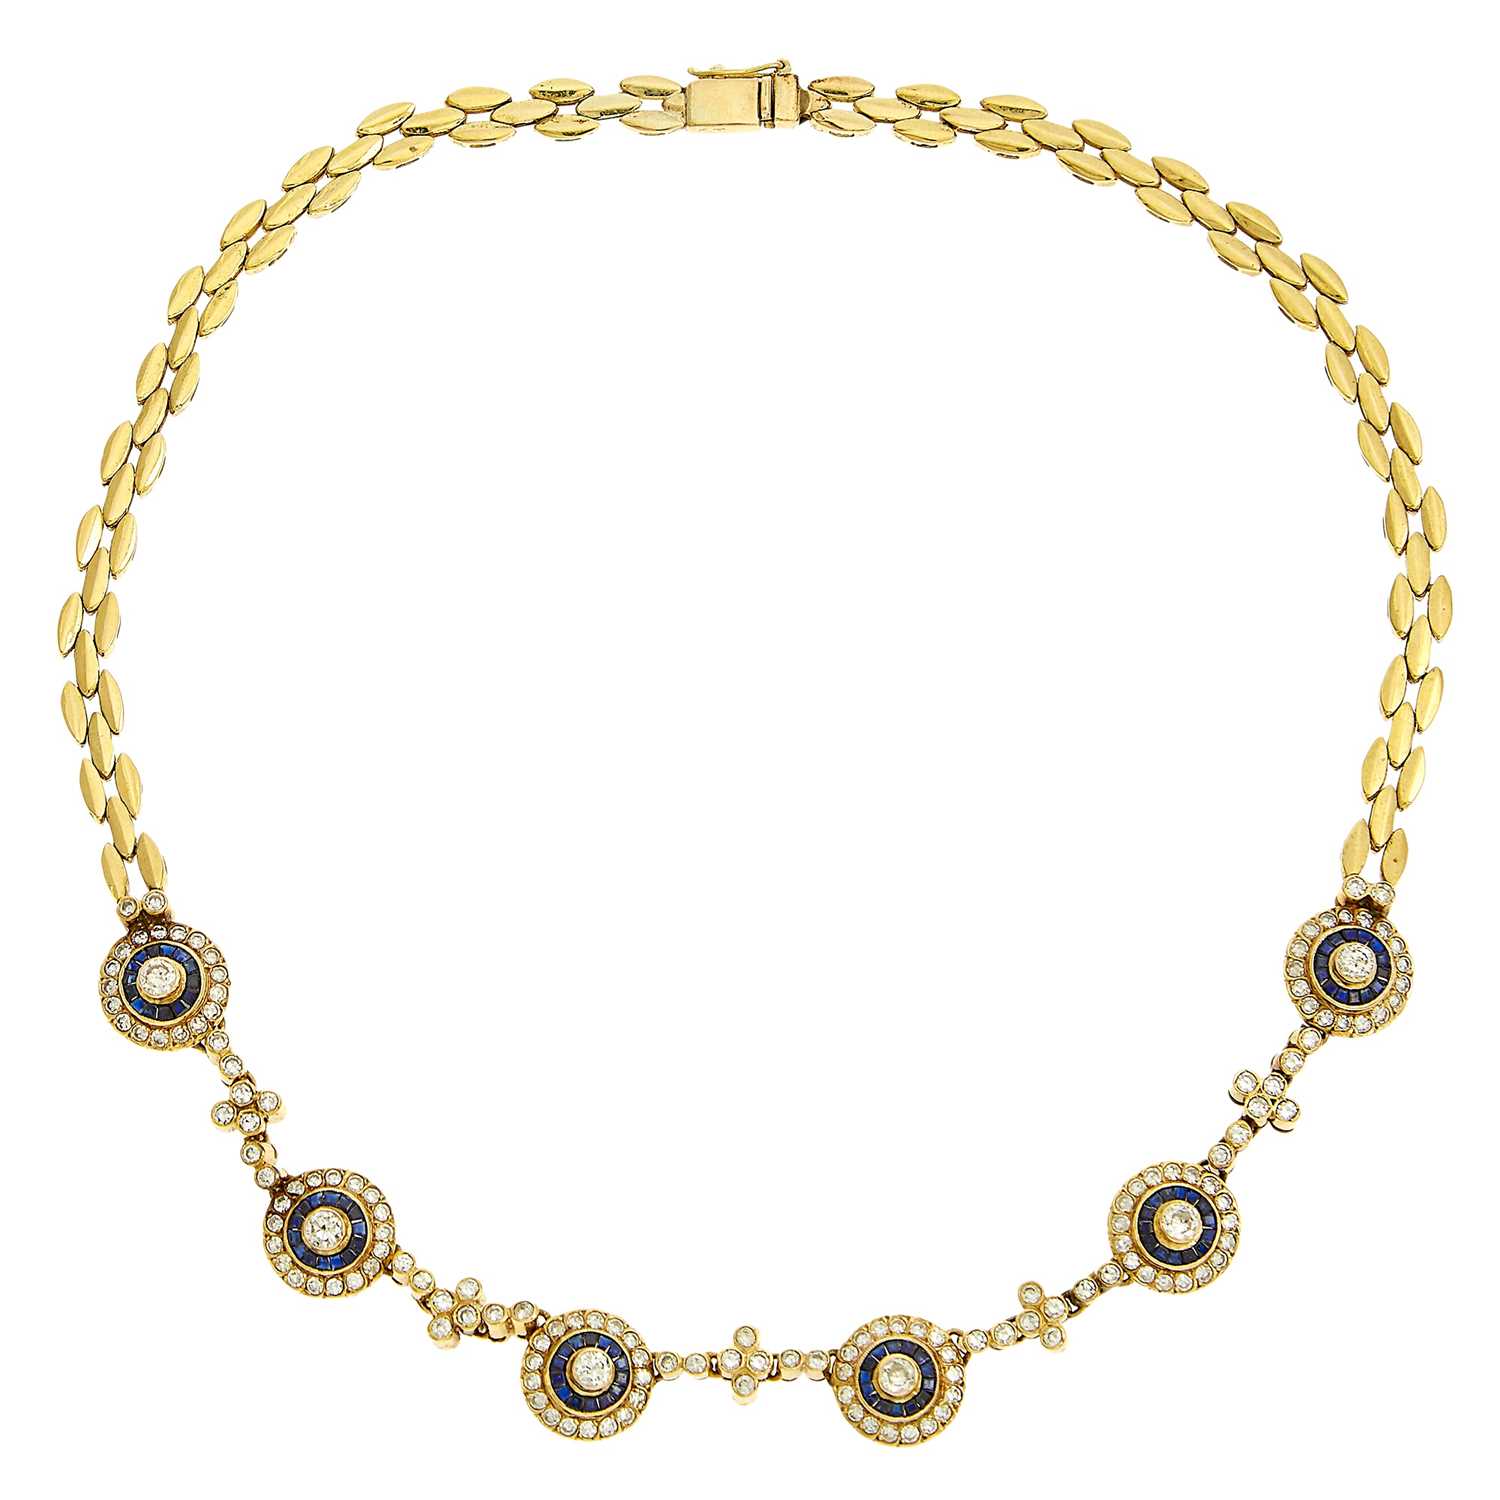 Lot 1207 - Gold, Diamond and Sapphire Necklace